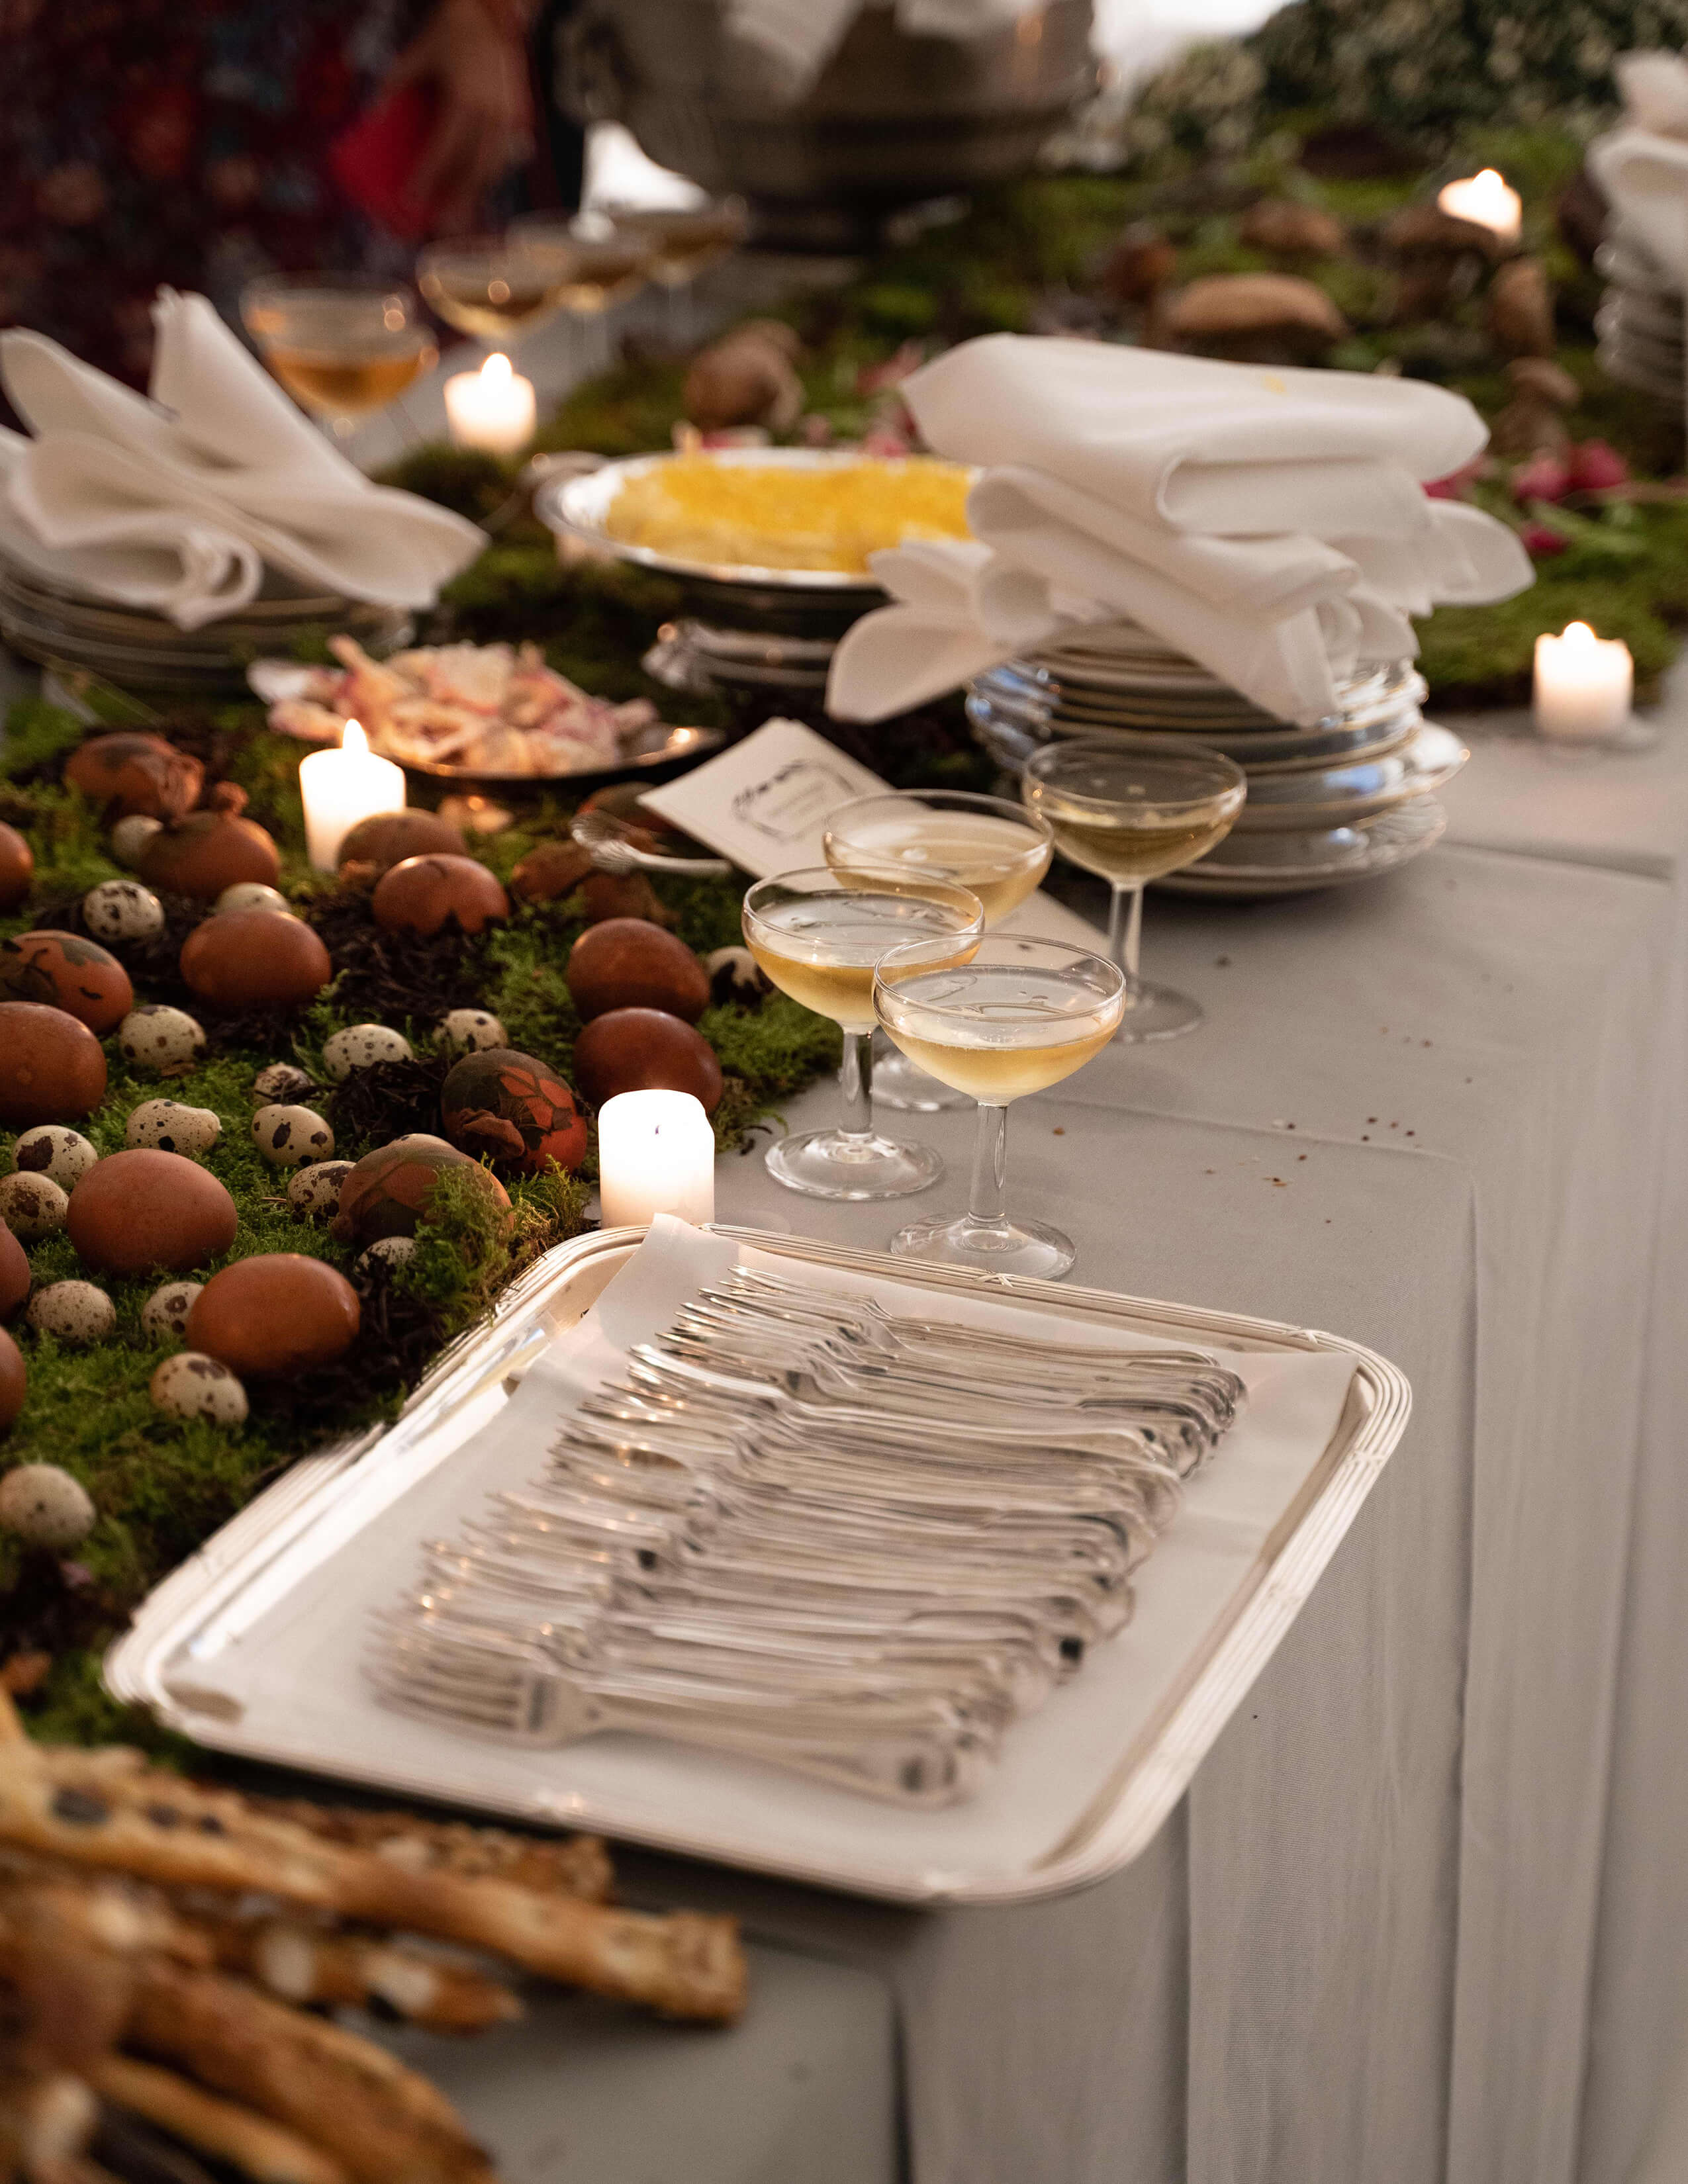 Plenty of forks are displayed on top of a white sheet of silverware and there are different kinds of eggs displayed on moss and a couple of glasses of drinks, plates and serviettes.